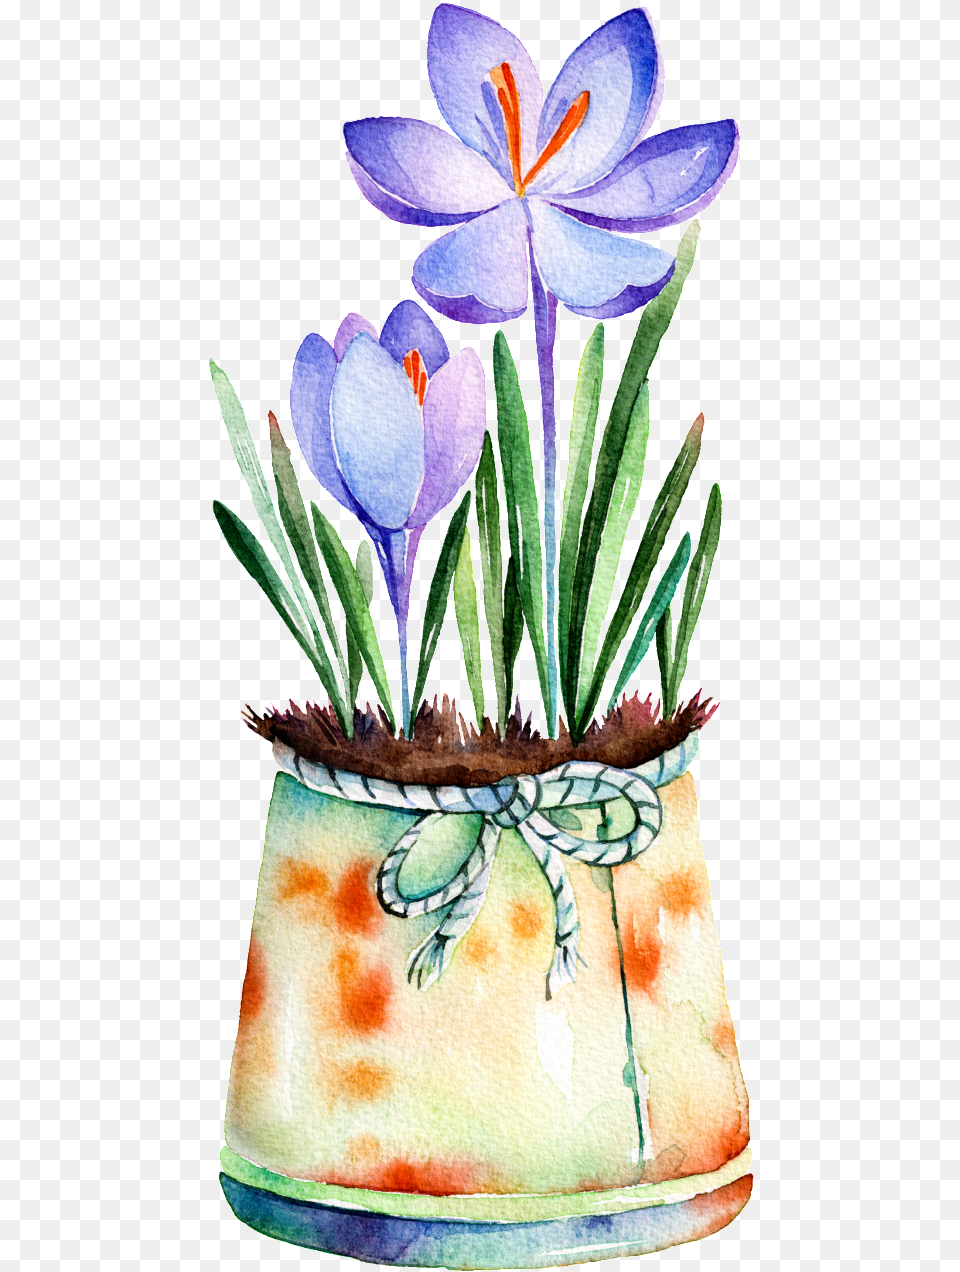 Download Purple Flower Potted Hand Painted Watercolor Flower In A Vase Drawing Watercolor, Plant, Potted Plant, Petal, Pottery Free Transparent Png